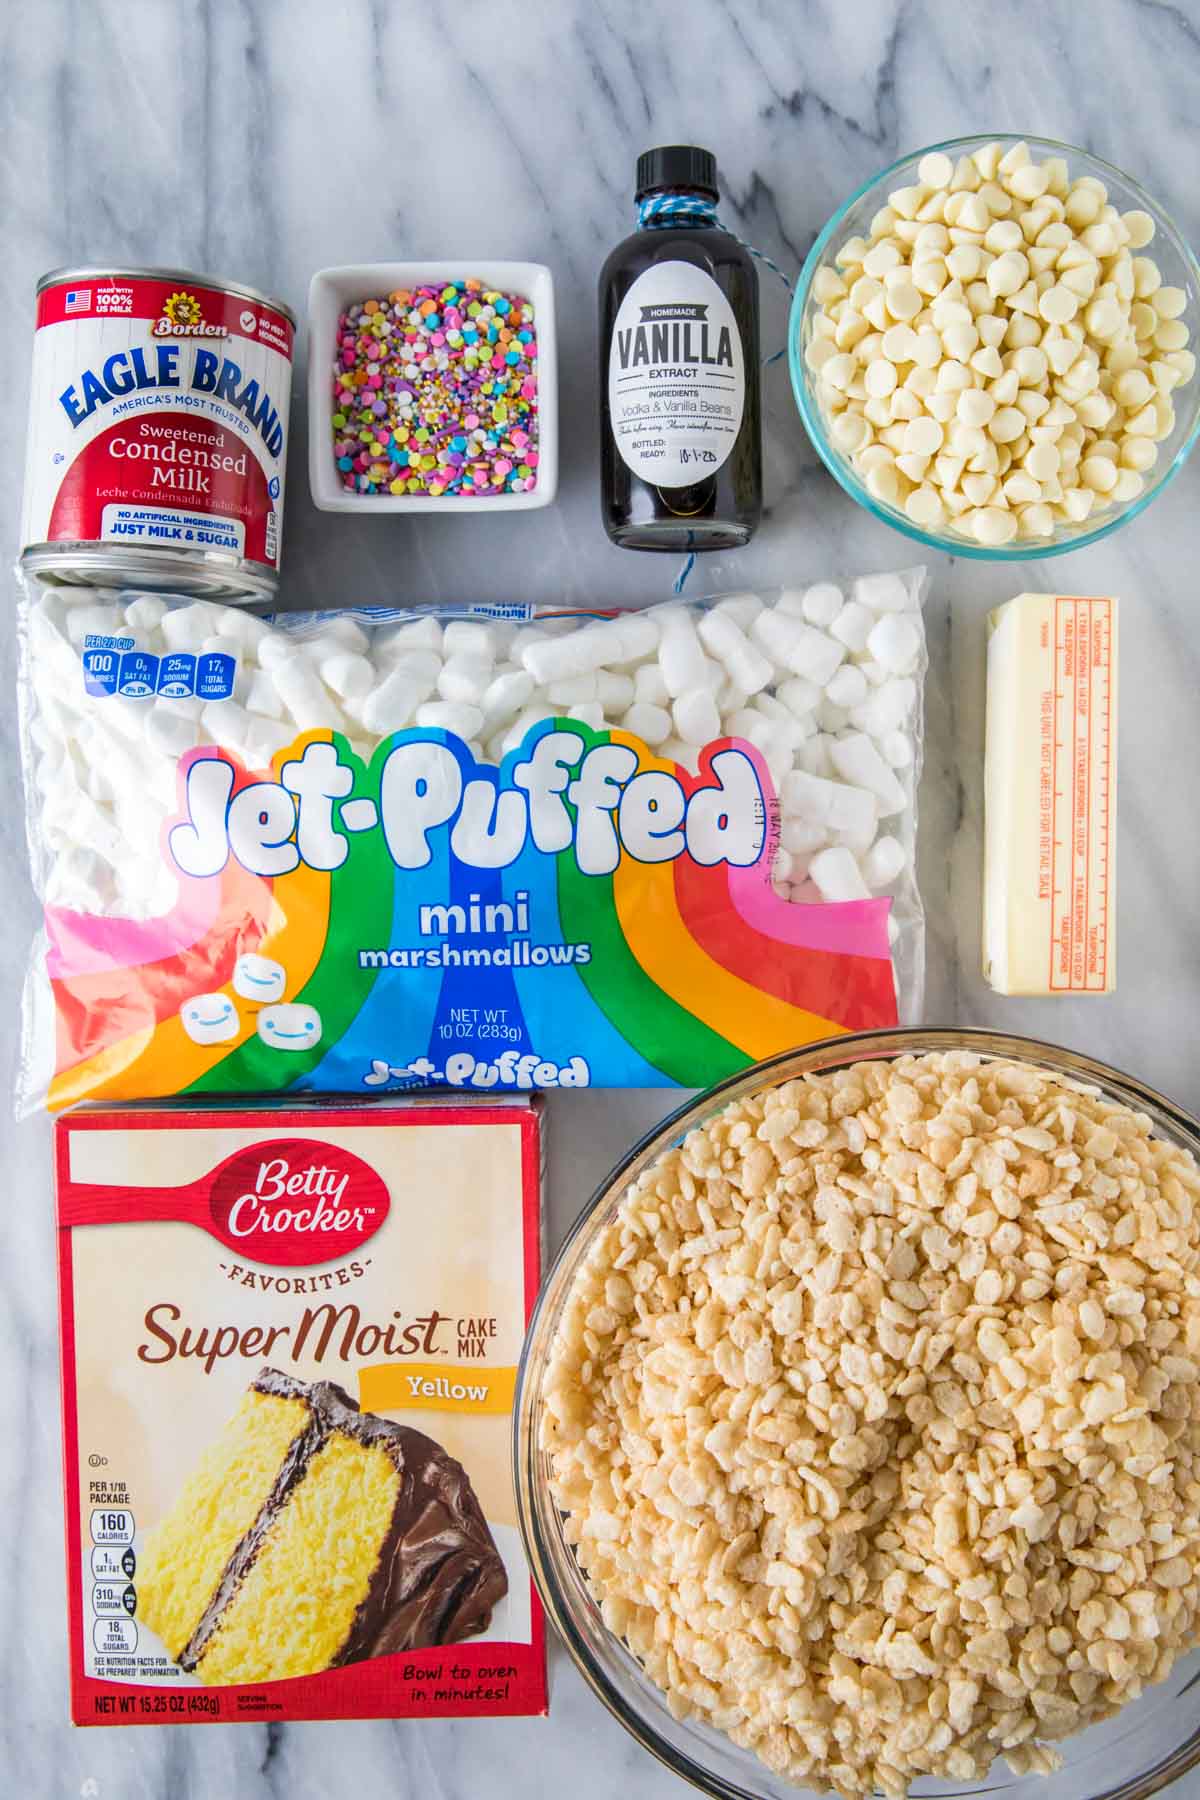 Overhead view of ingredients including rice krispies, marshmallows, sweetened condensed milk, cake mix, sprinkles, and more.